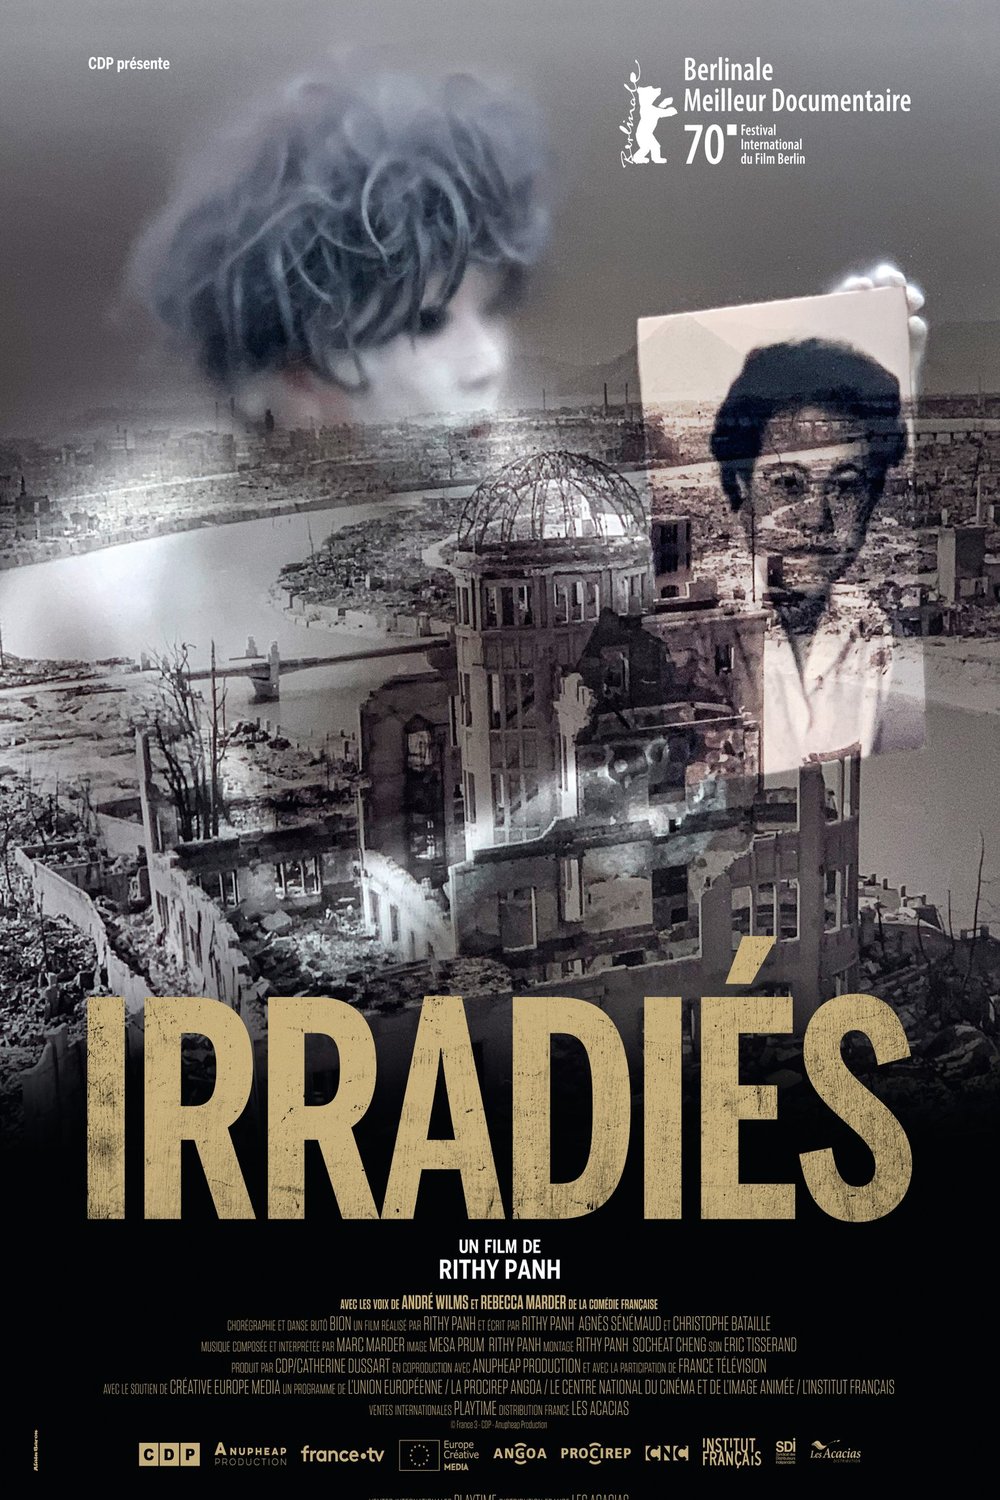 Poster of the movie Irradiated